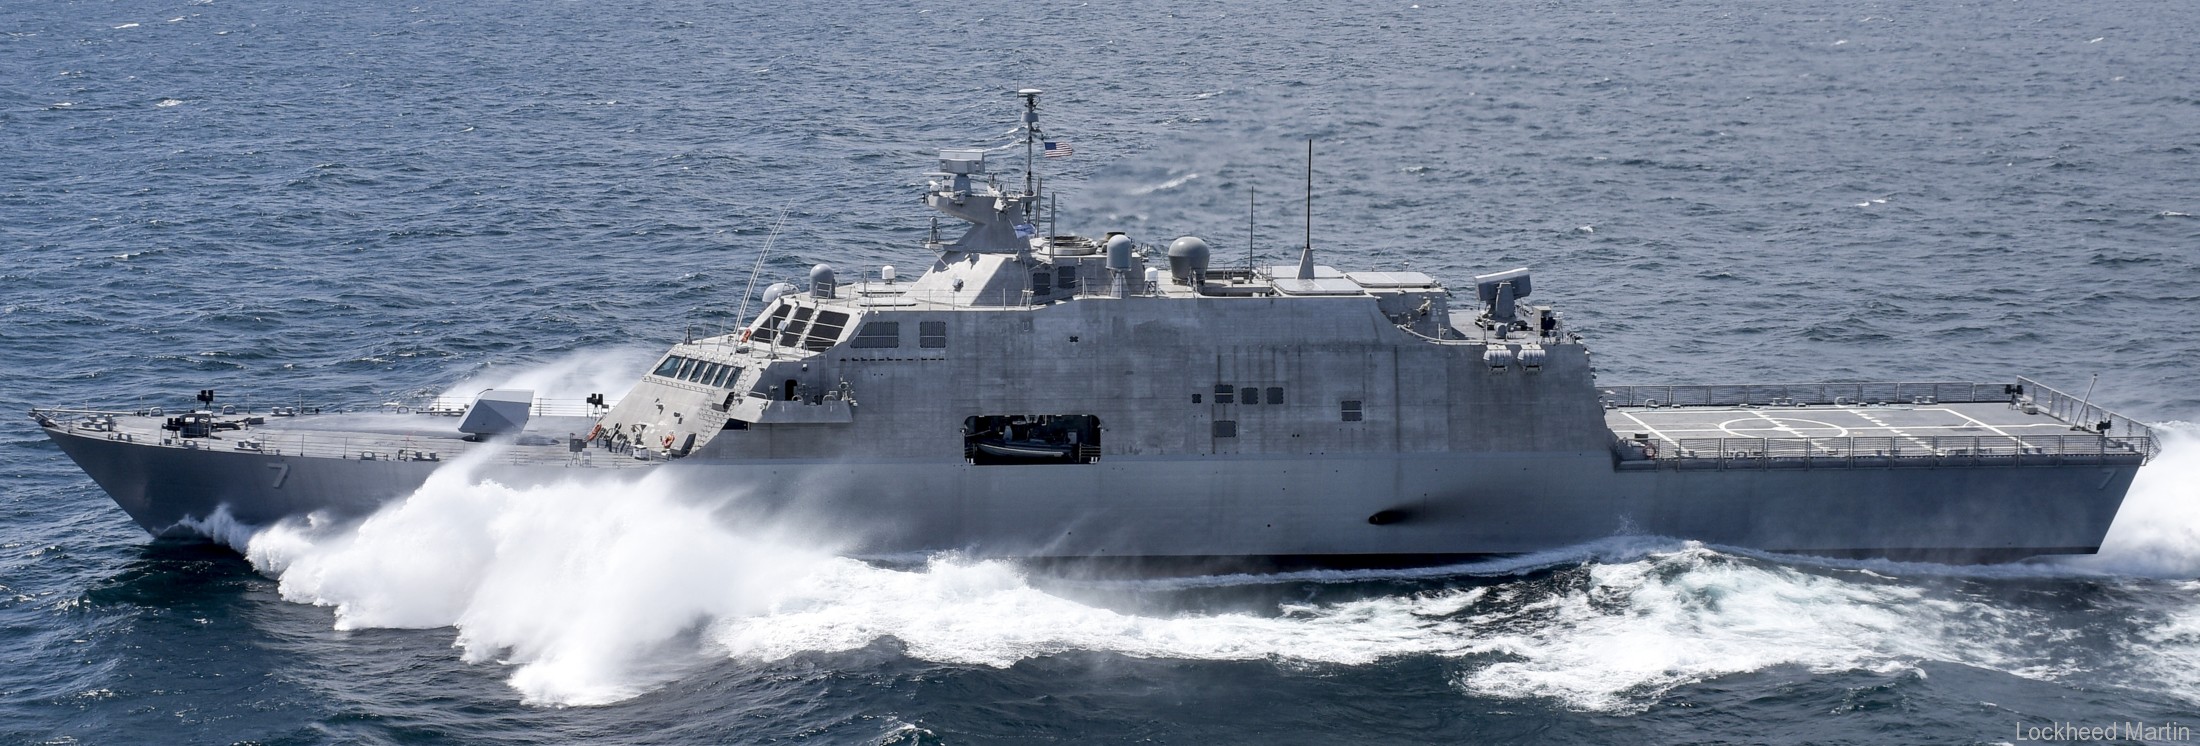 lcs-7 uss detroit freedom class littoral combat ship us navy 29